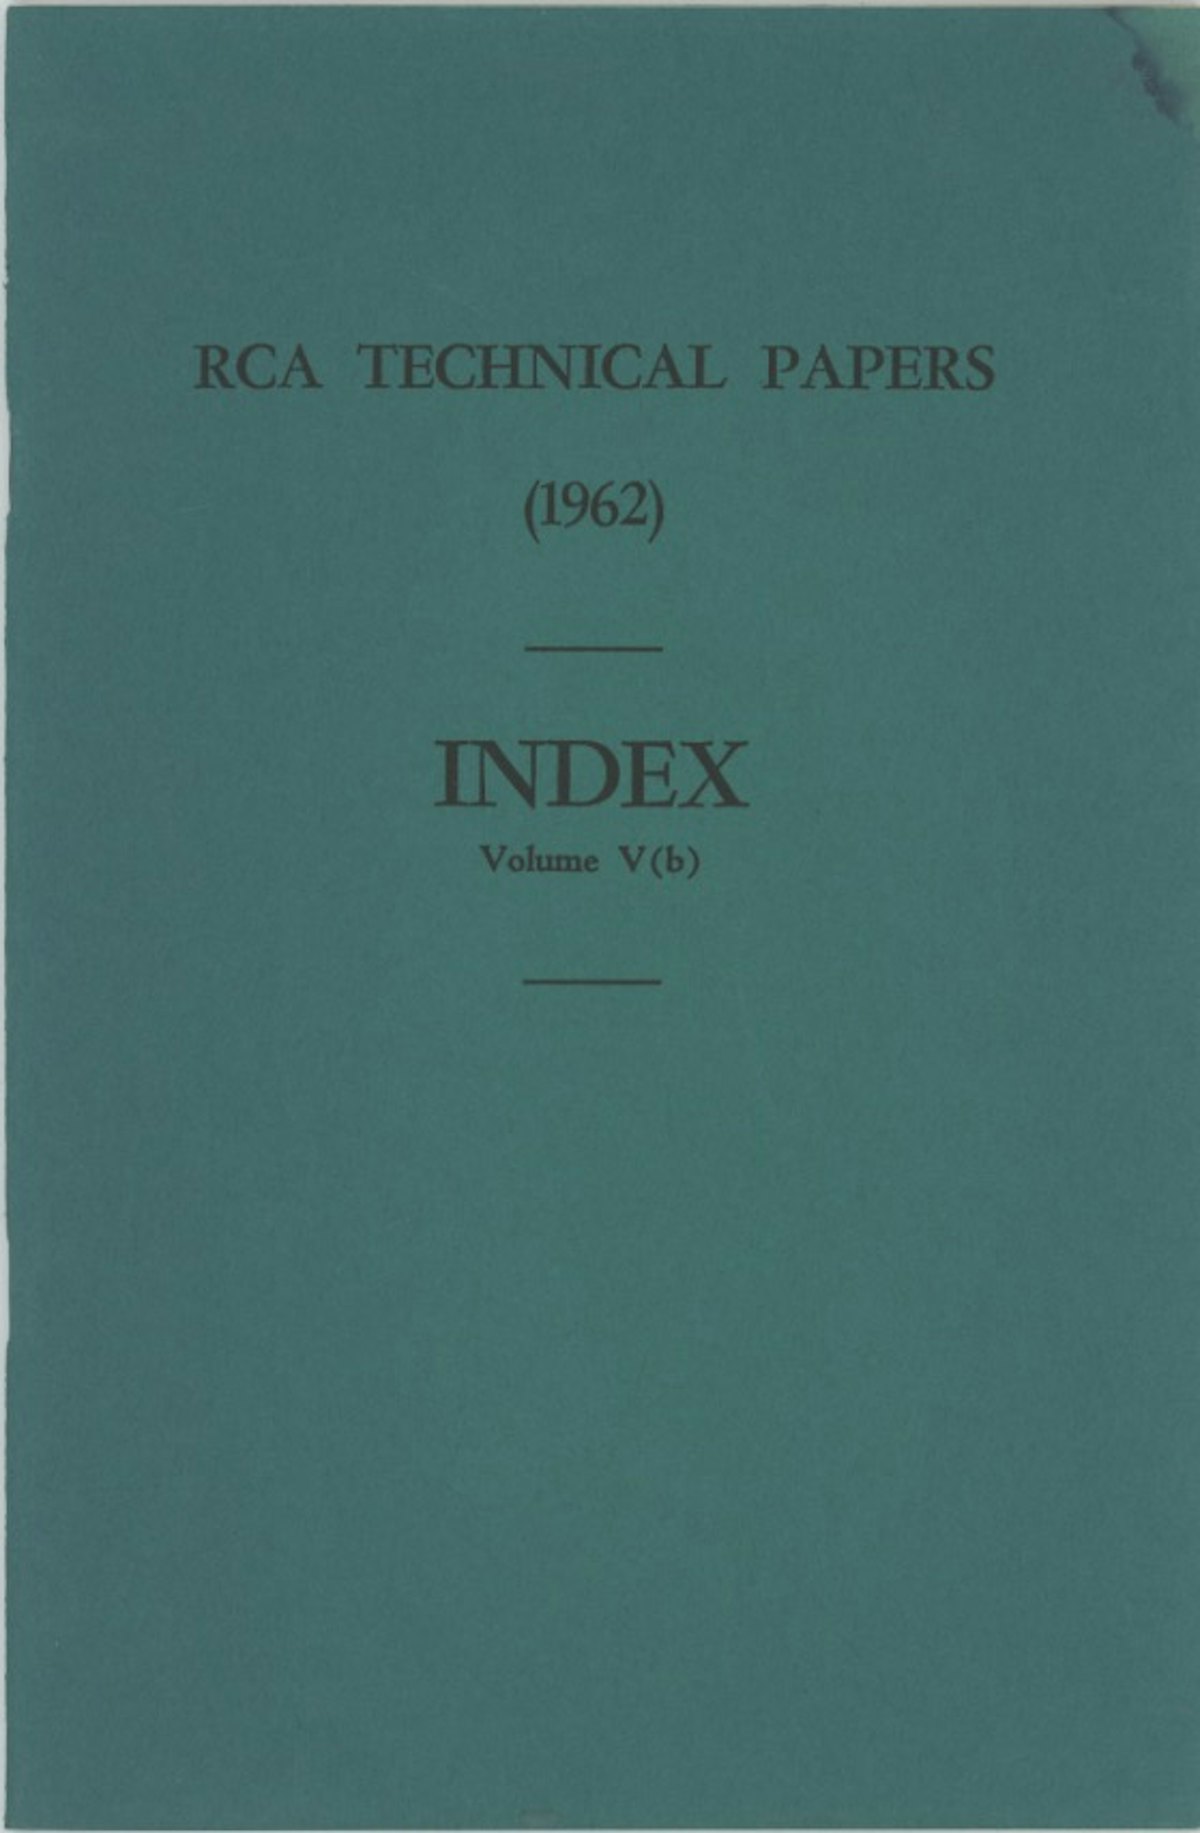 RCA Technical Papers Index Volume V (b)